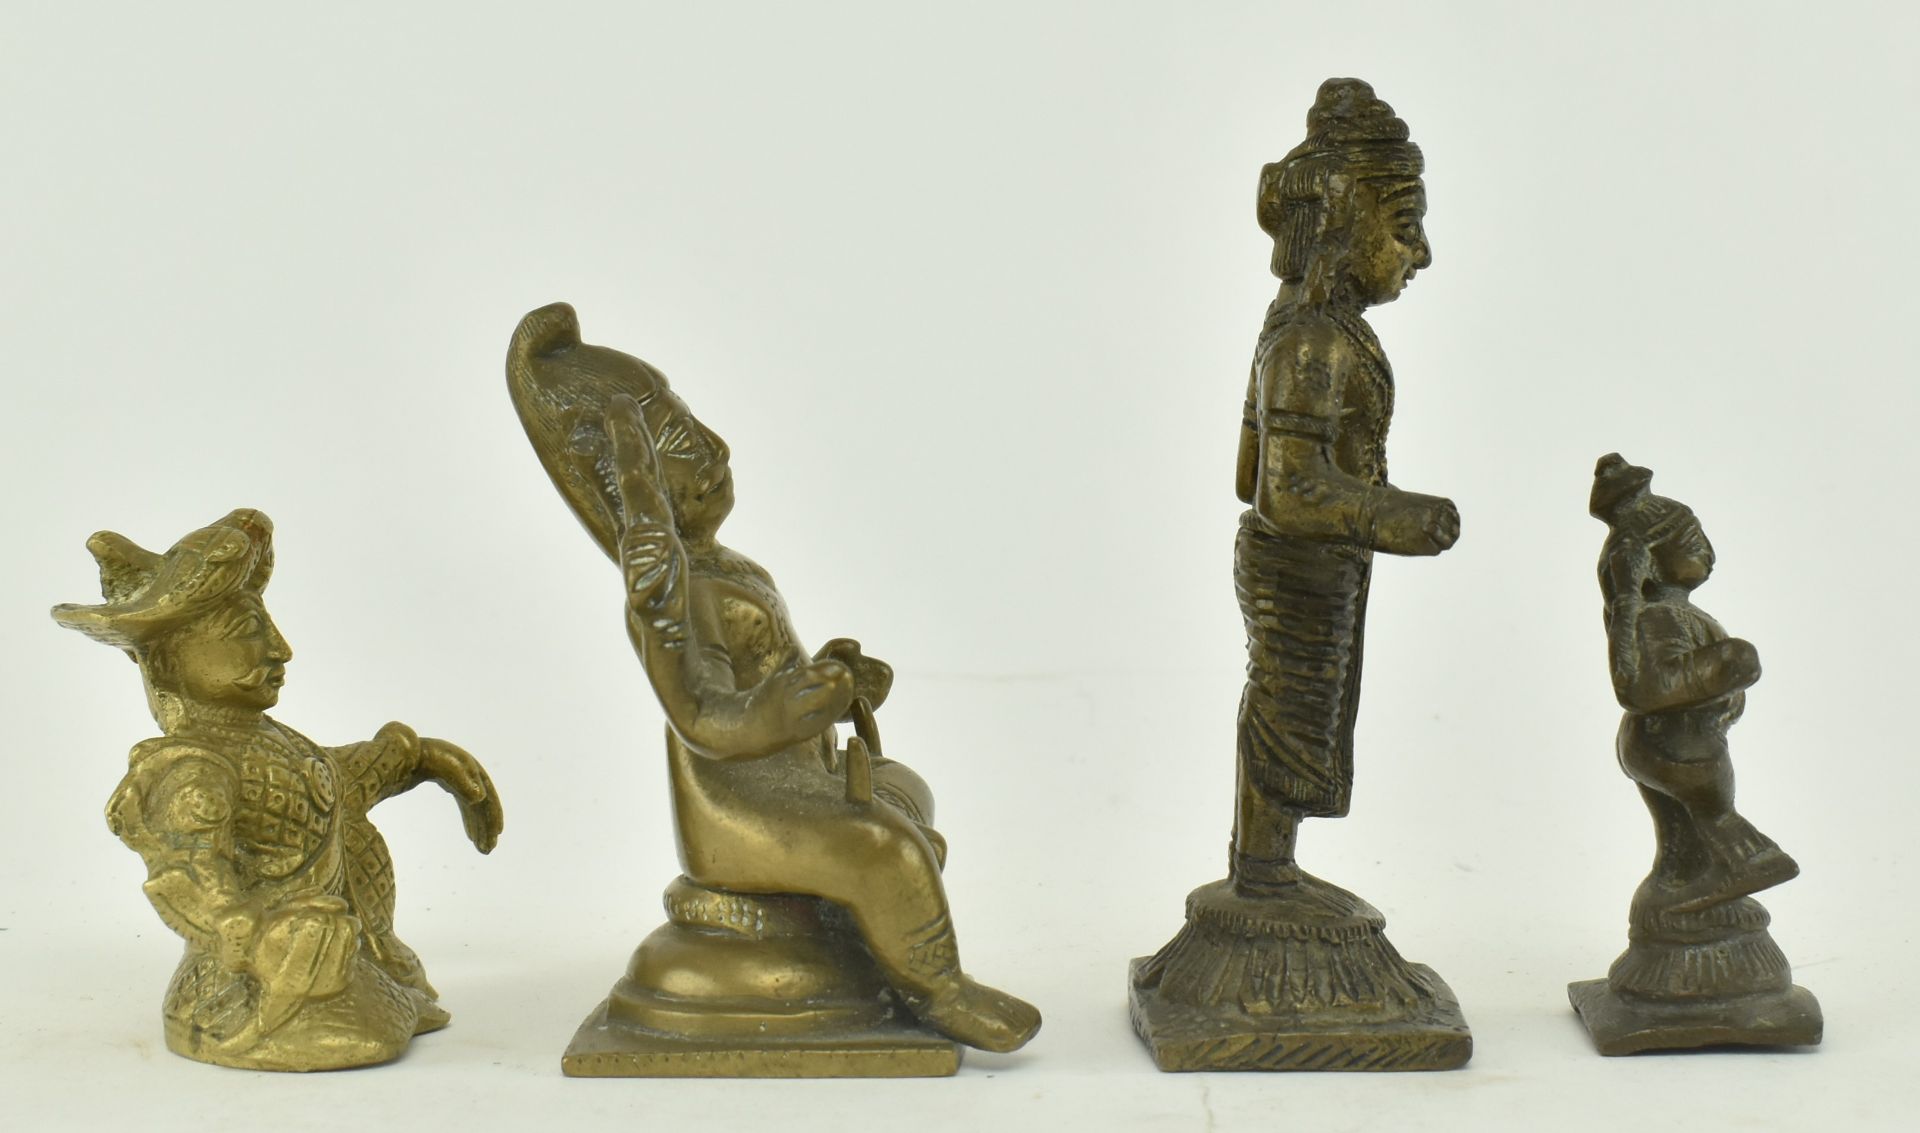 FOUR SOUTH EAST ASIAN AMULET STATUES OF HINDU DEITIES - Image 2 of 5